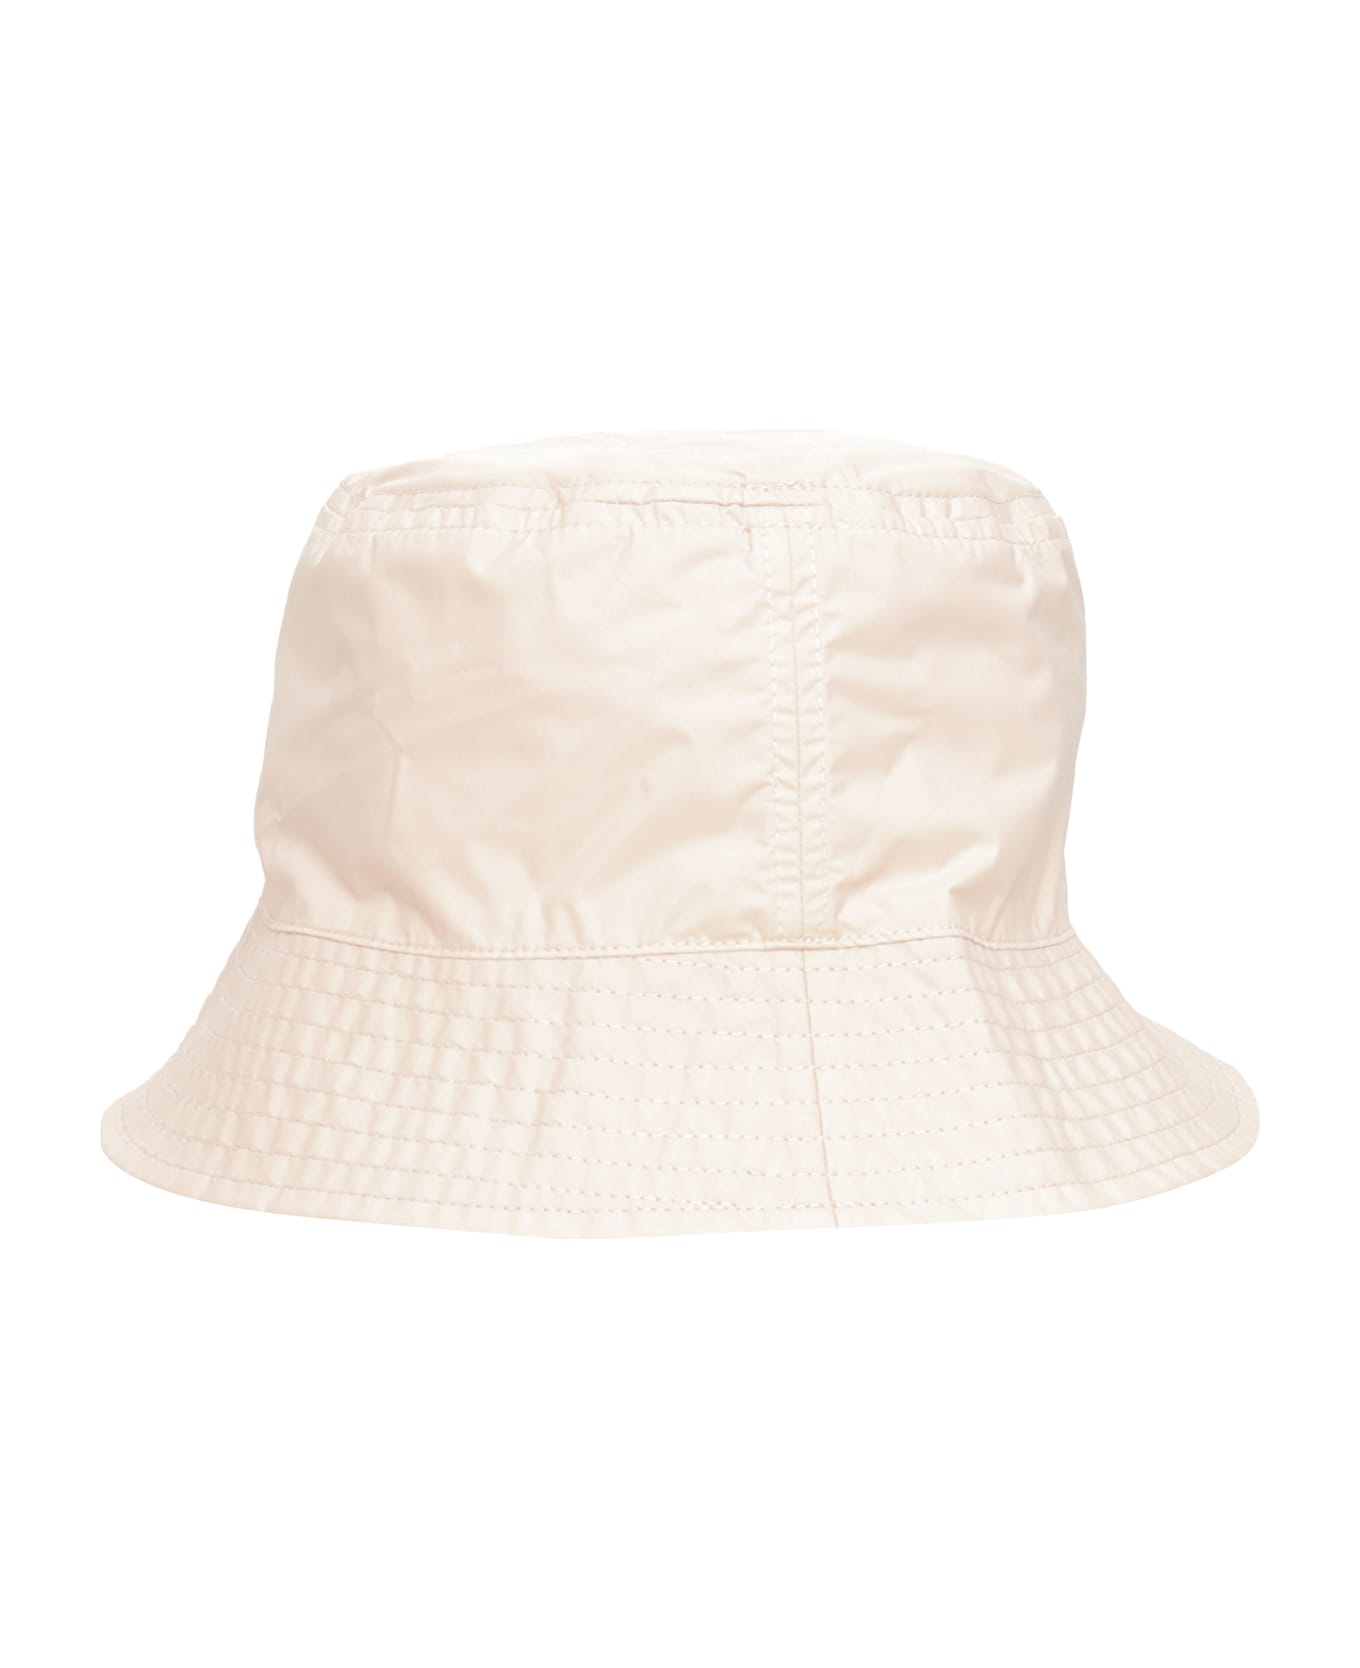 K-Way Pascalle Bucket Hat - PINK